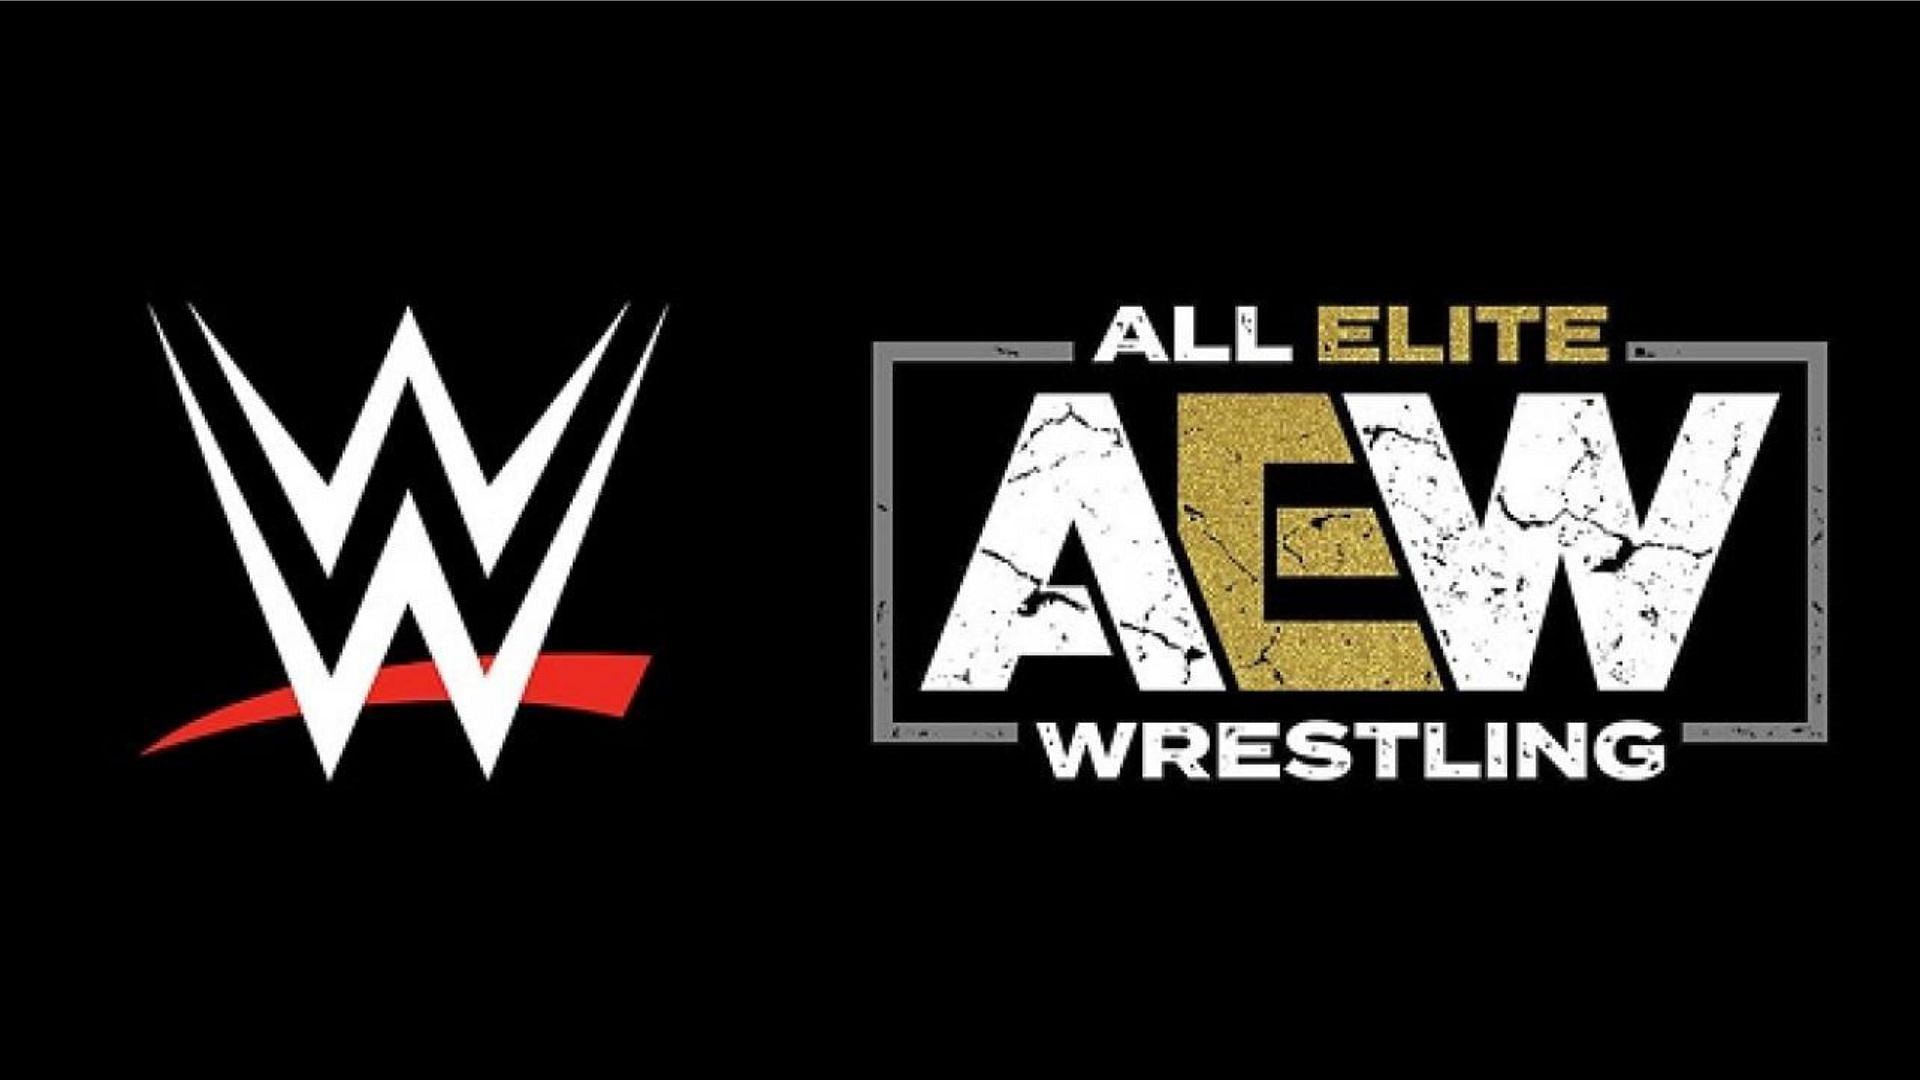 Former WWE star made AEW debut